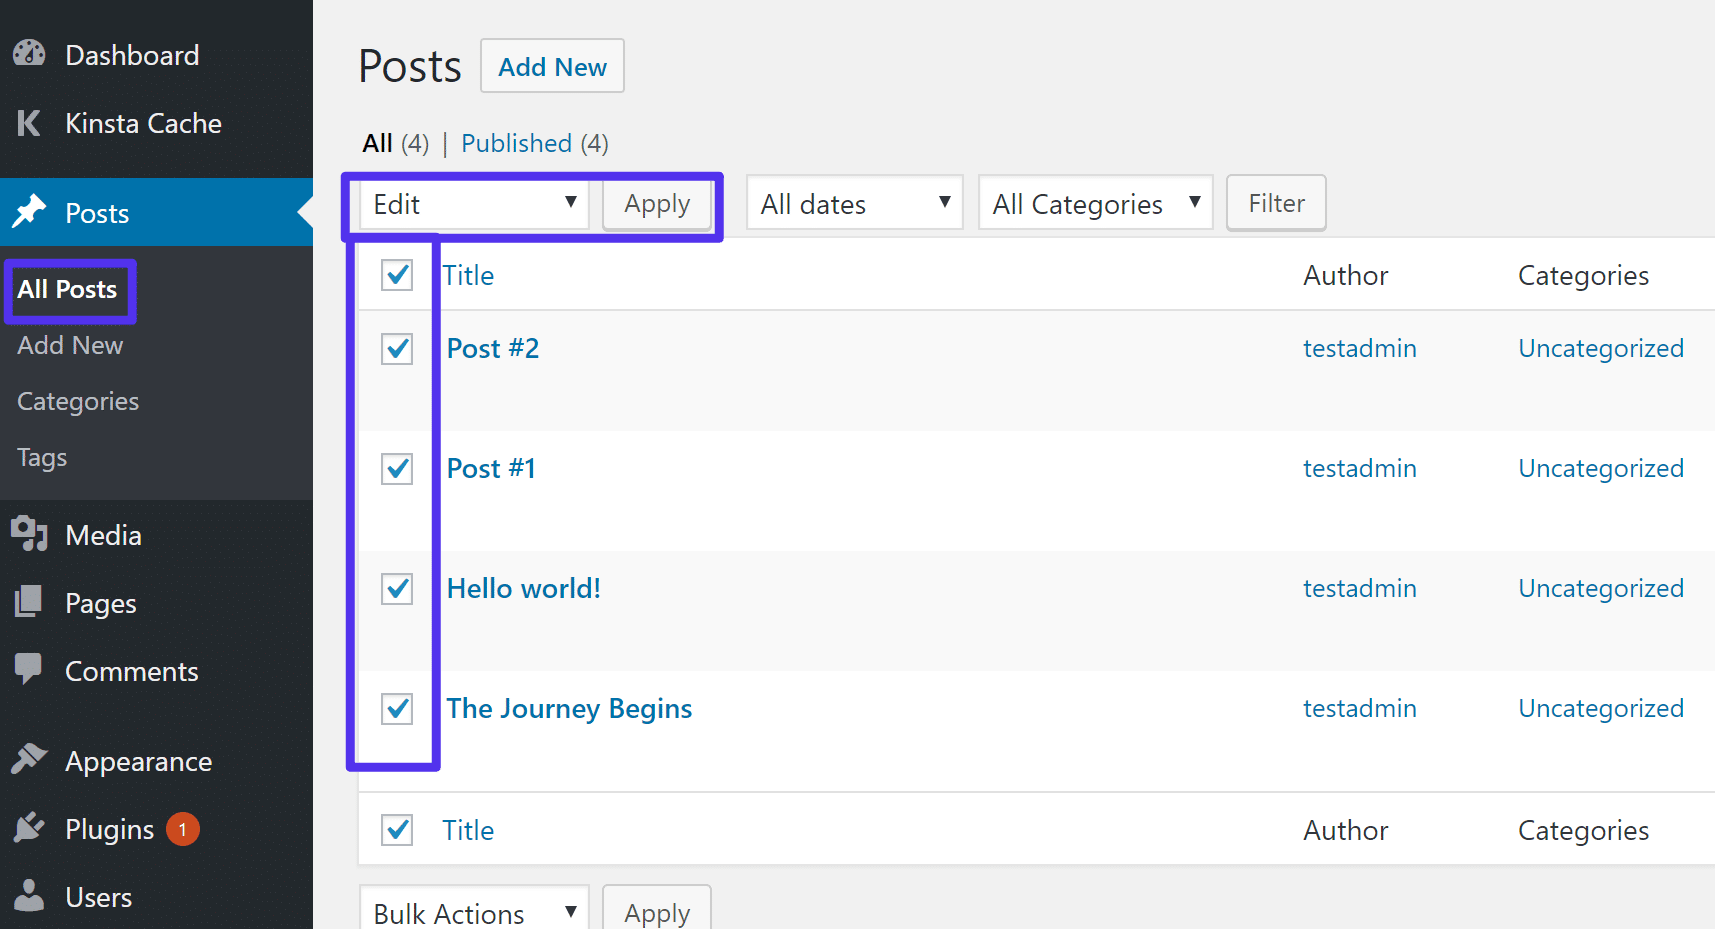 Select all your posts